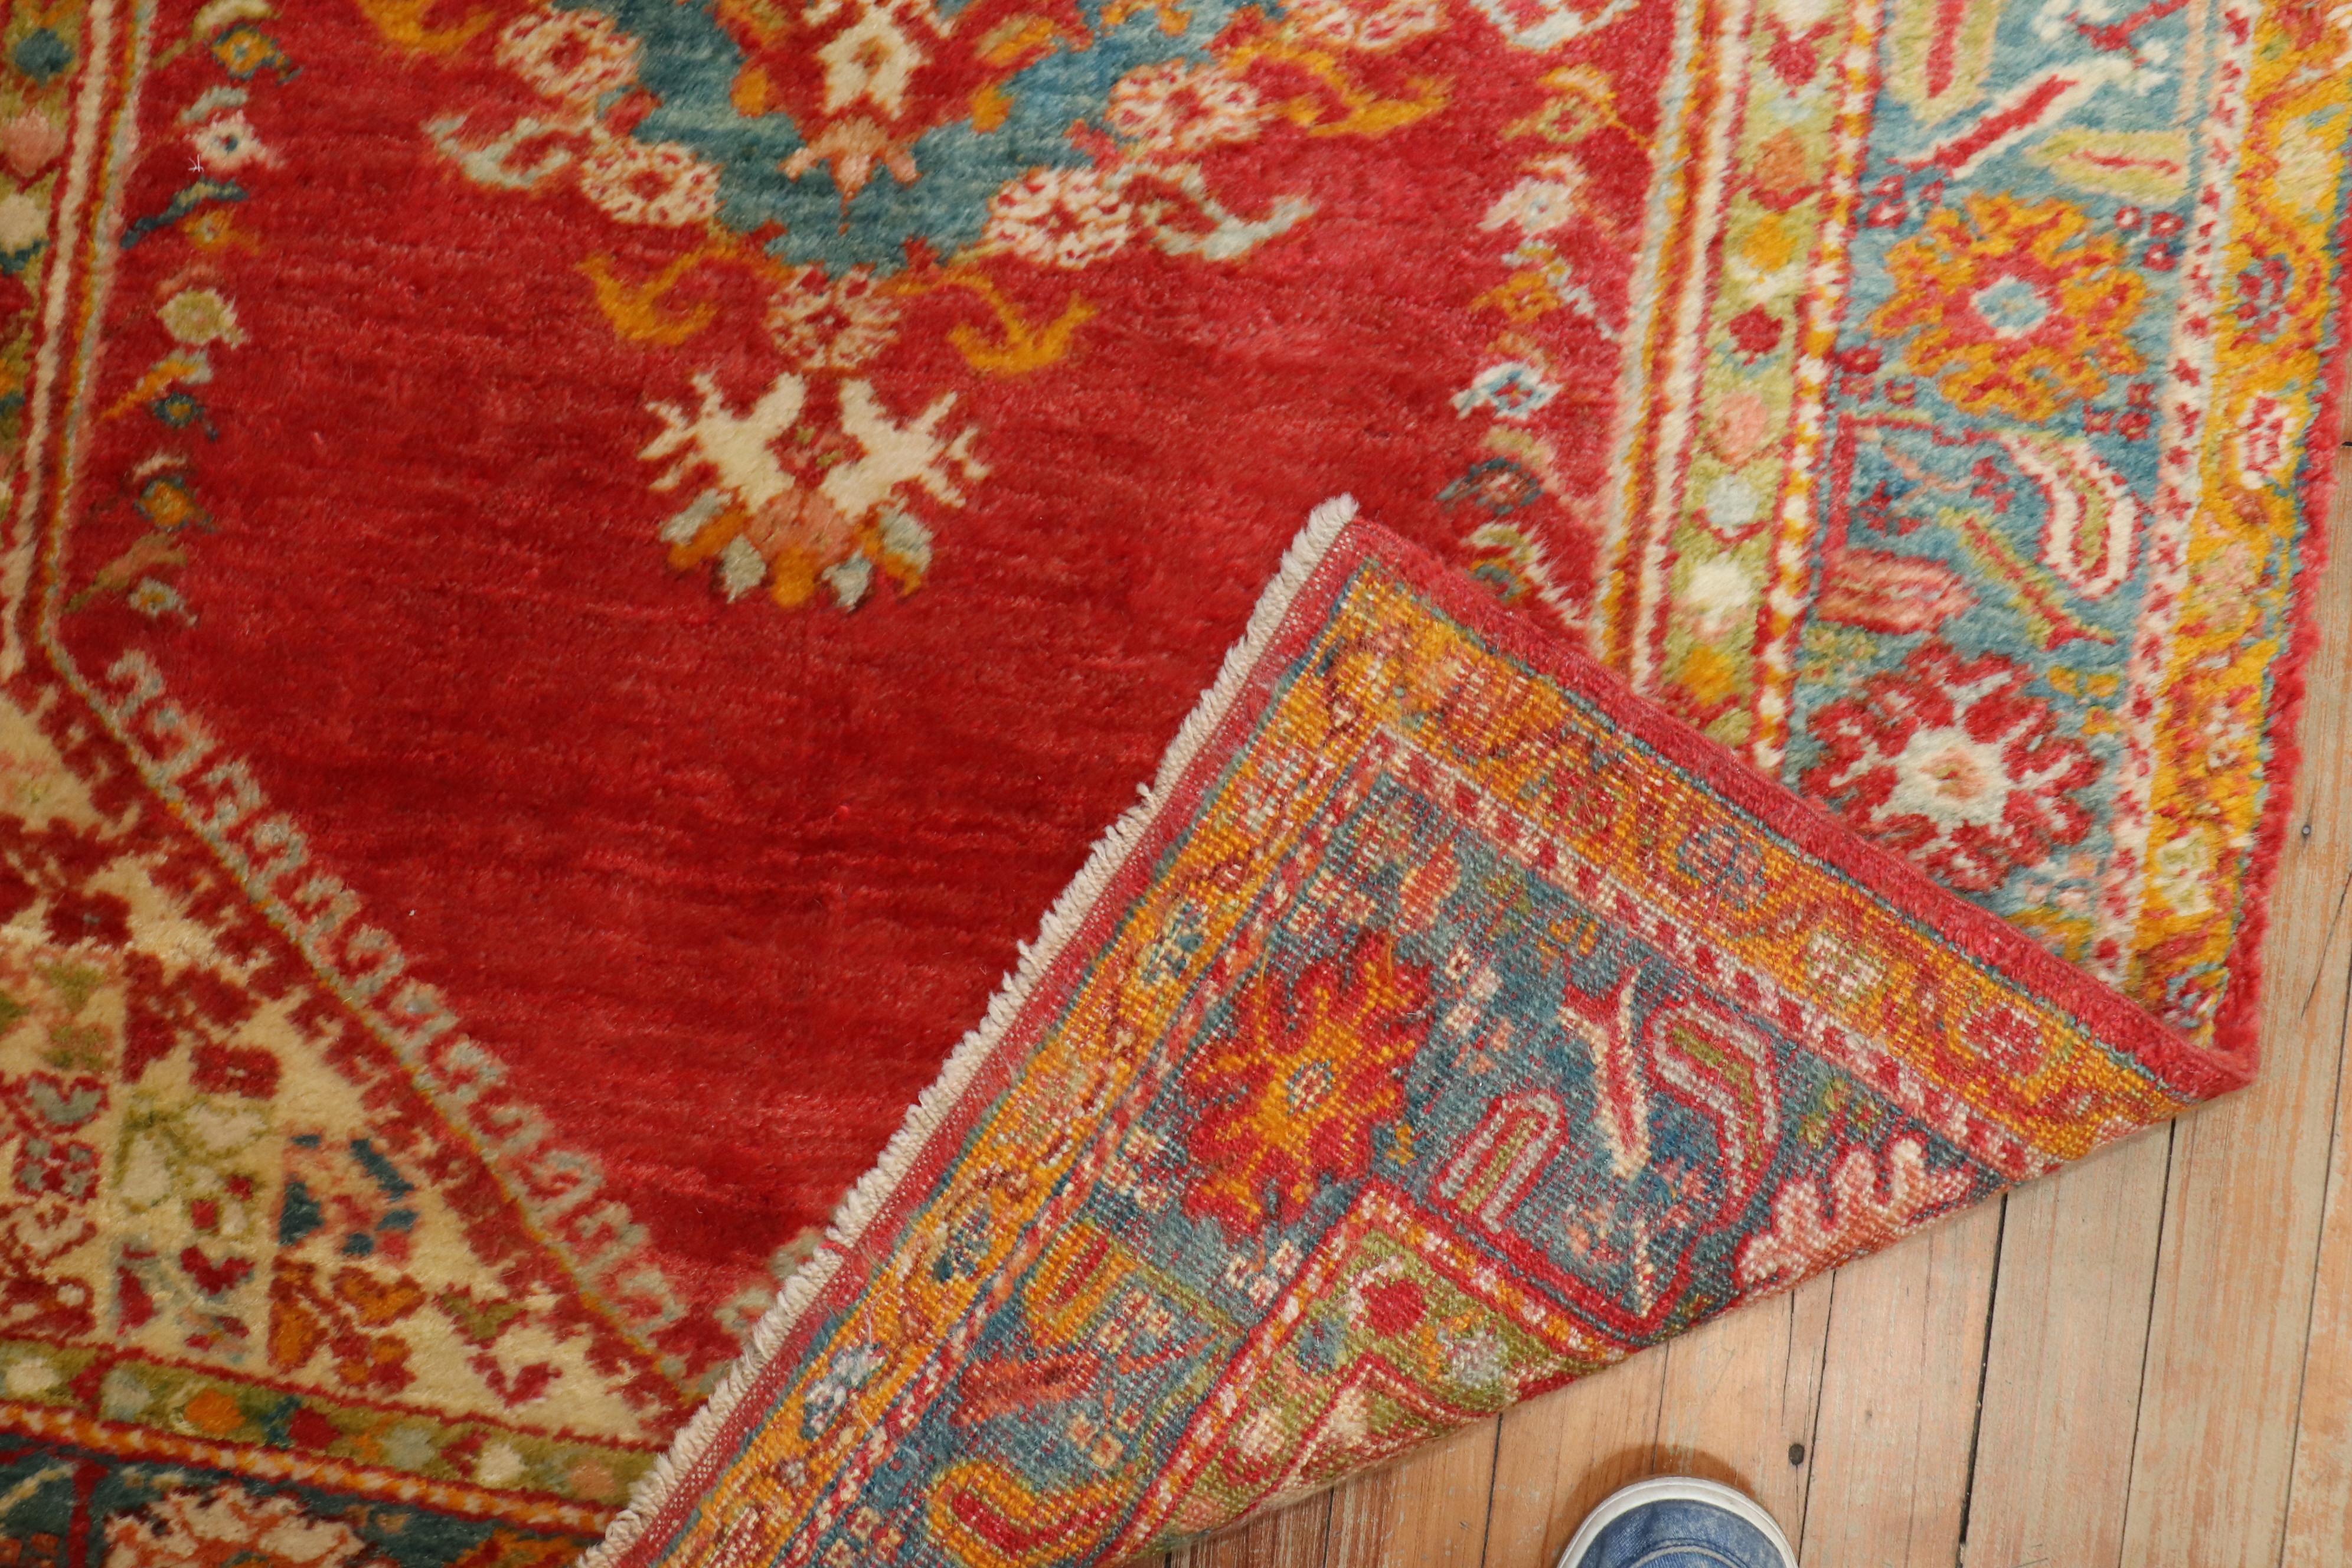 Hand-Woven Red Turquoise Angora Wool Antique Oushak Throw Rug